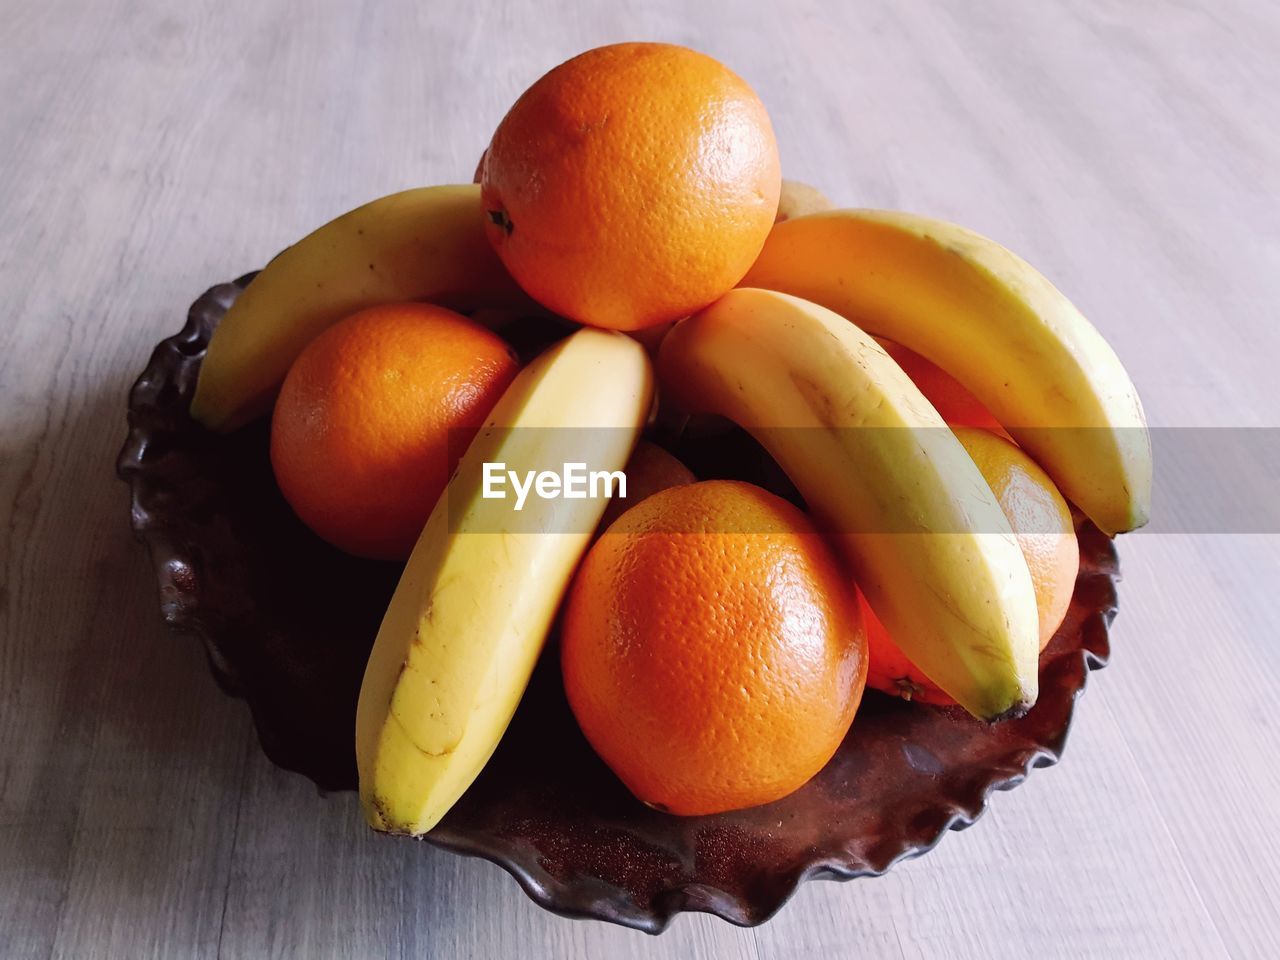 HIGH ANGLE VIEW OF ORANGE FRUIT ON TABLE